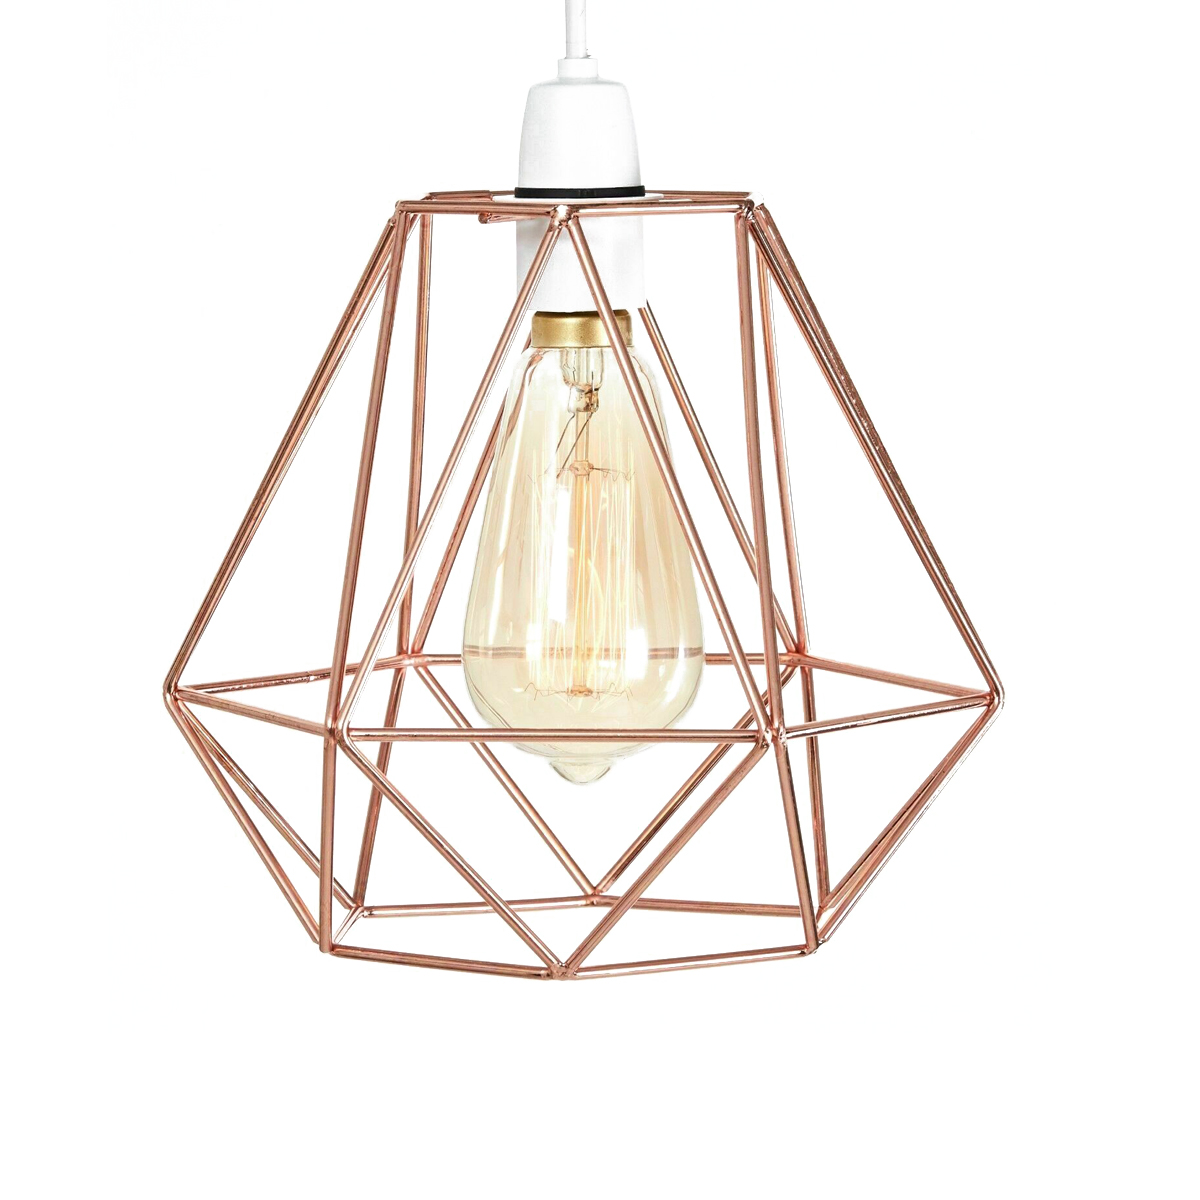 Geometric-Wire-Ceiling-Pendant-Light-Lampshade-Metal-Cage-Kitchen-Dining-Cafe-Without-Bulb-1758739-8